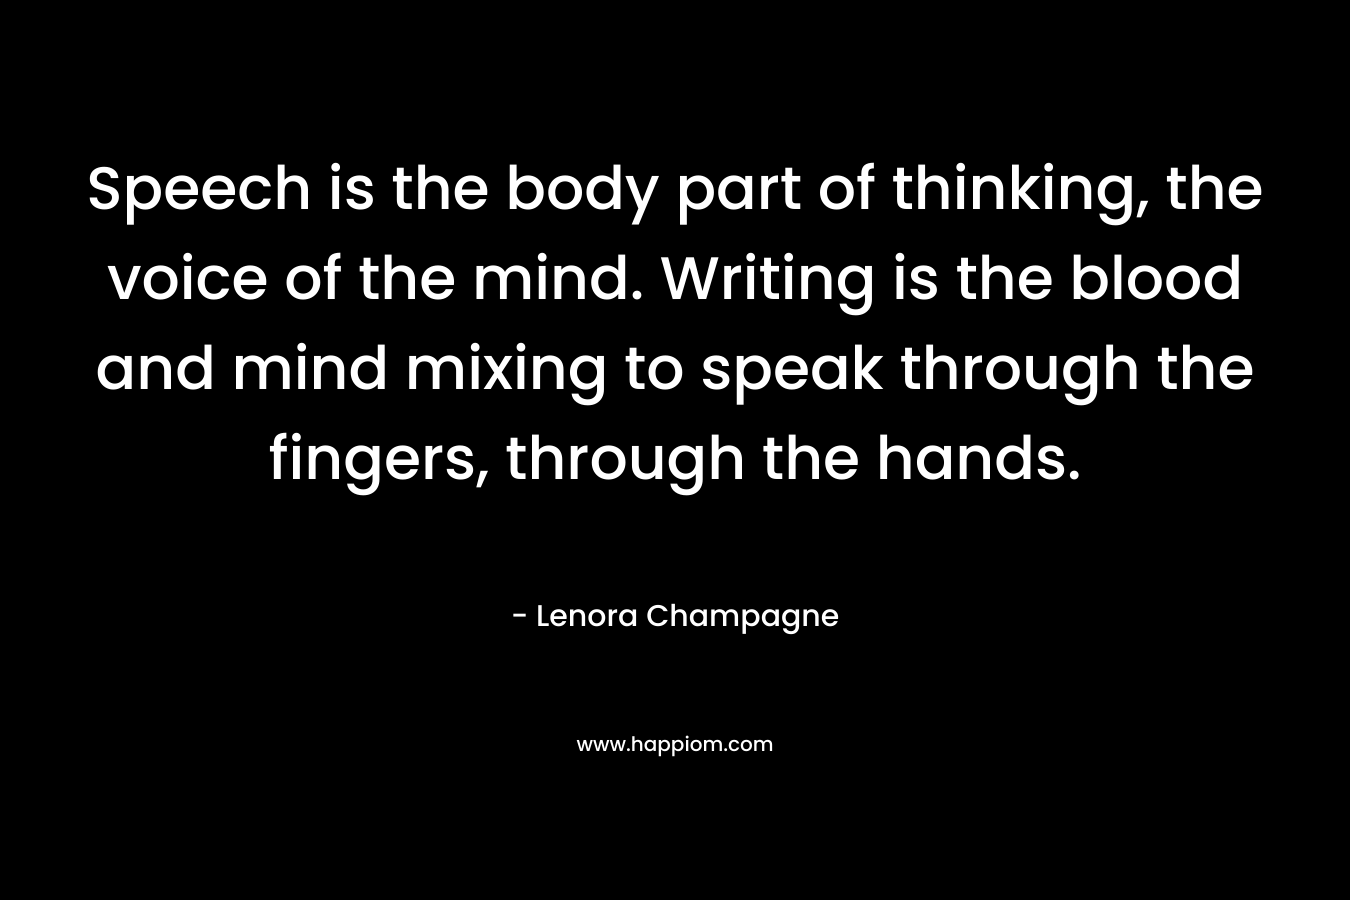 Speech is the body part of thinking, the voice of the mind. Writing is the blood and mind mixing to speak through the fingers, through the hands.